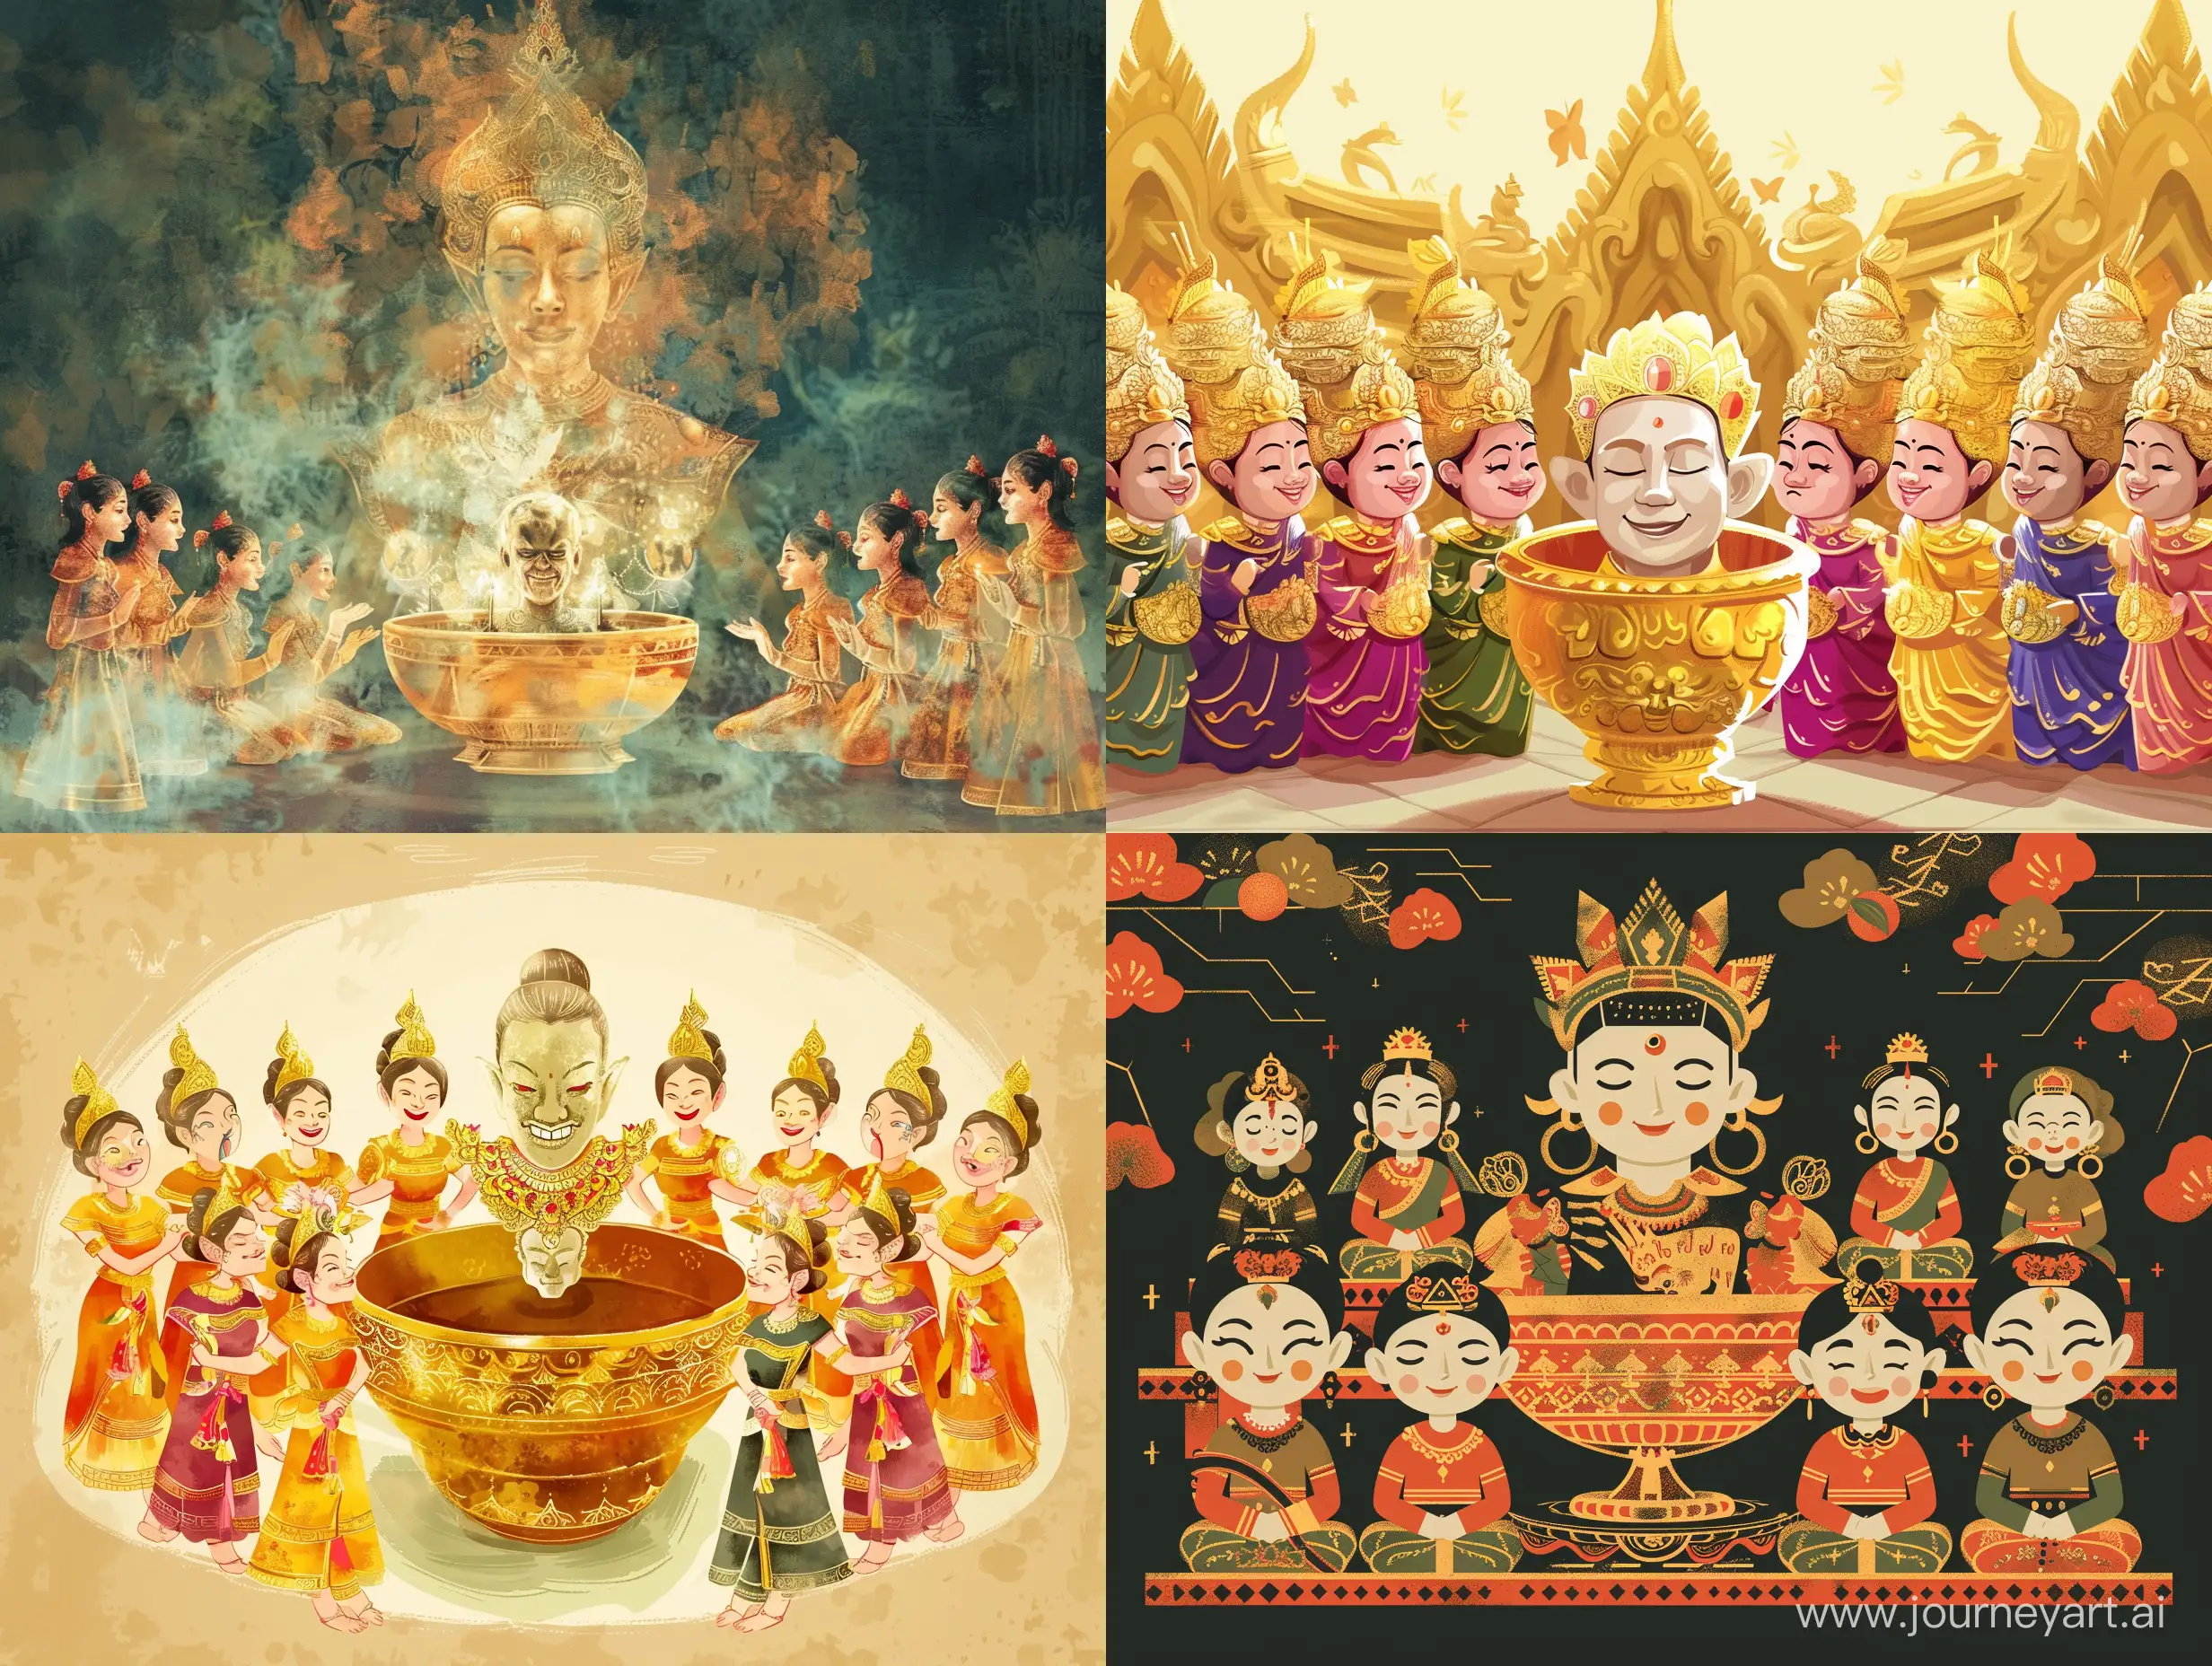 Enchanting-Depiction-of-12-Thai-Princesses-Surrounding-a-Gold-Bowl-with-the-Head-of-the-Thai-King-Fairytale-Illustration